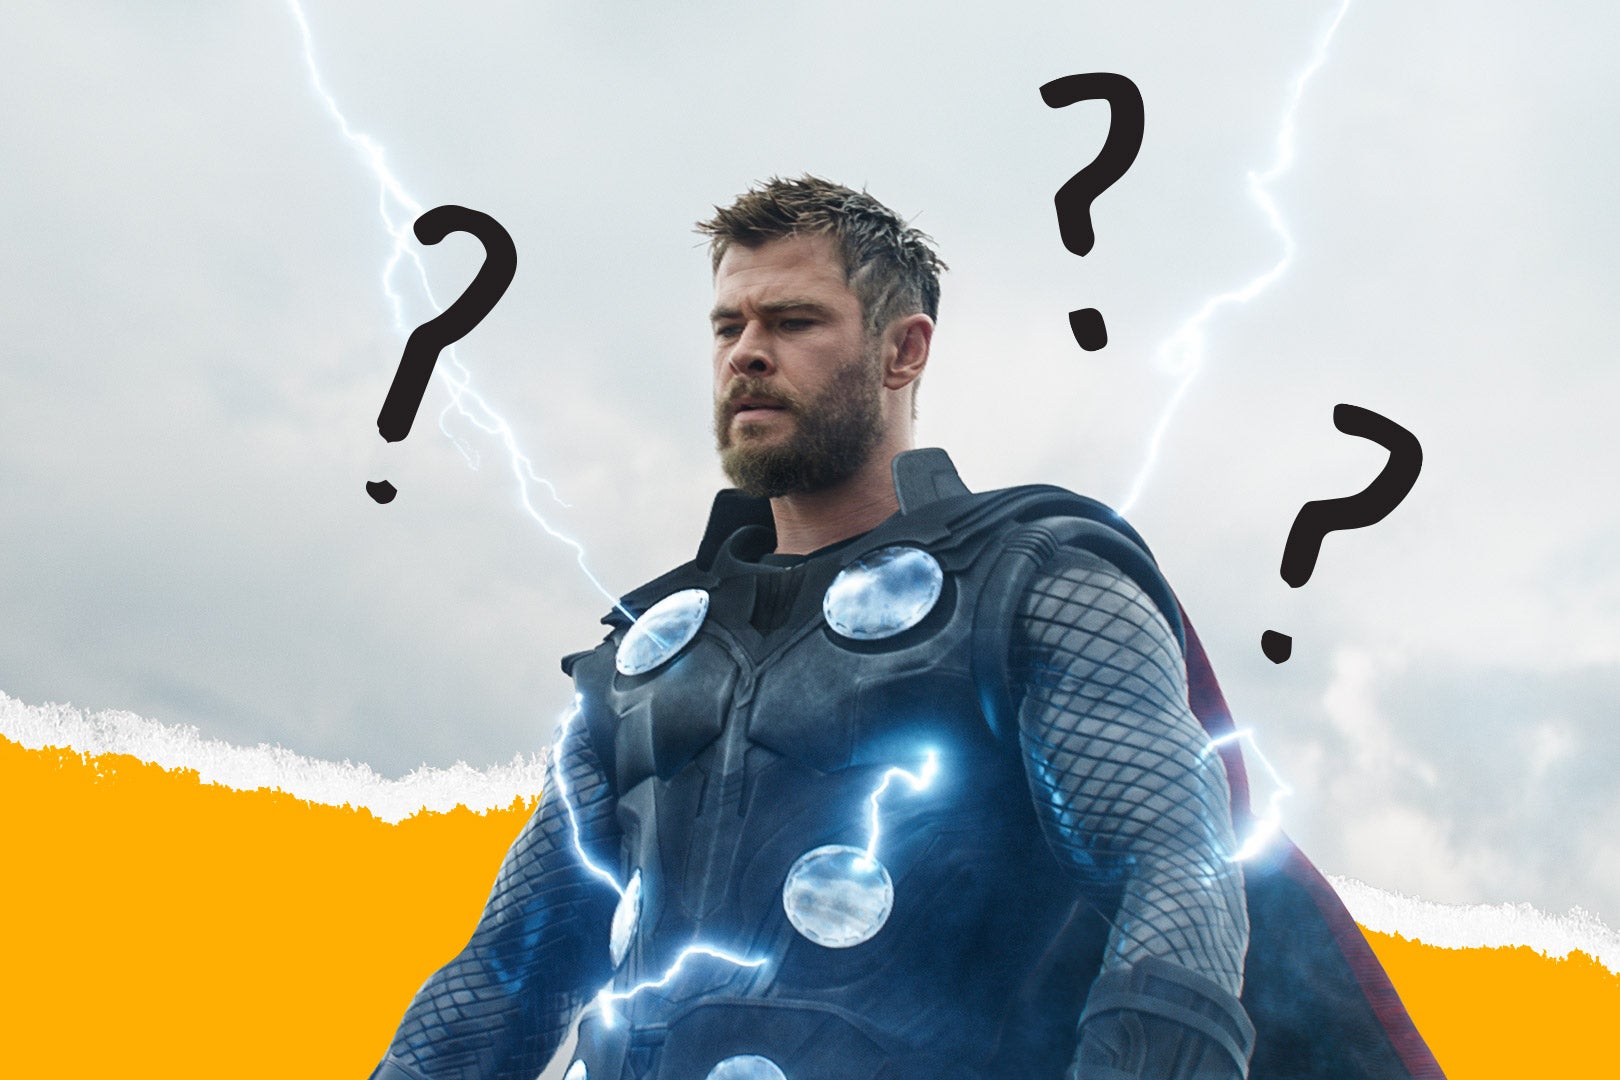 A character from Avengers: Endgame with question marks around him.